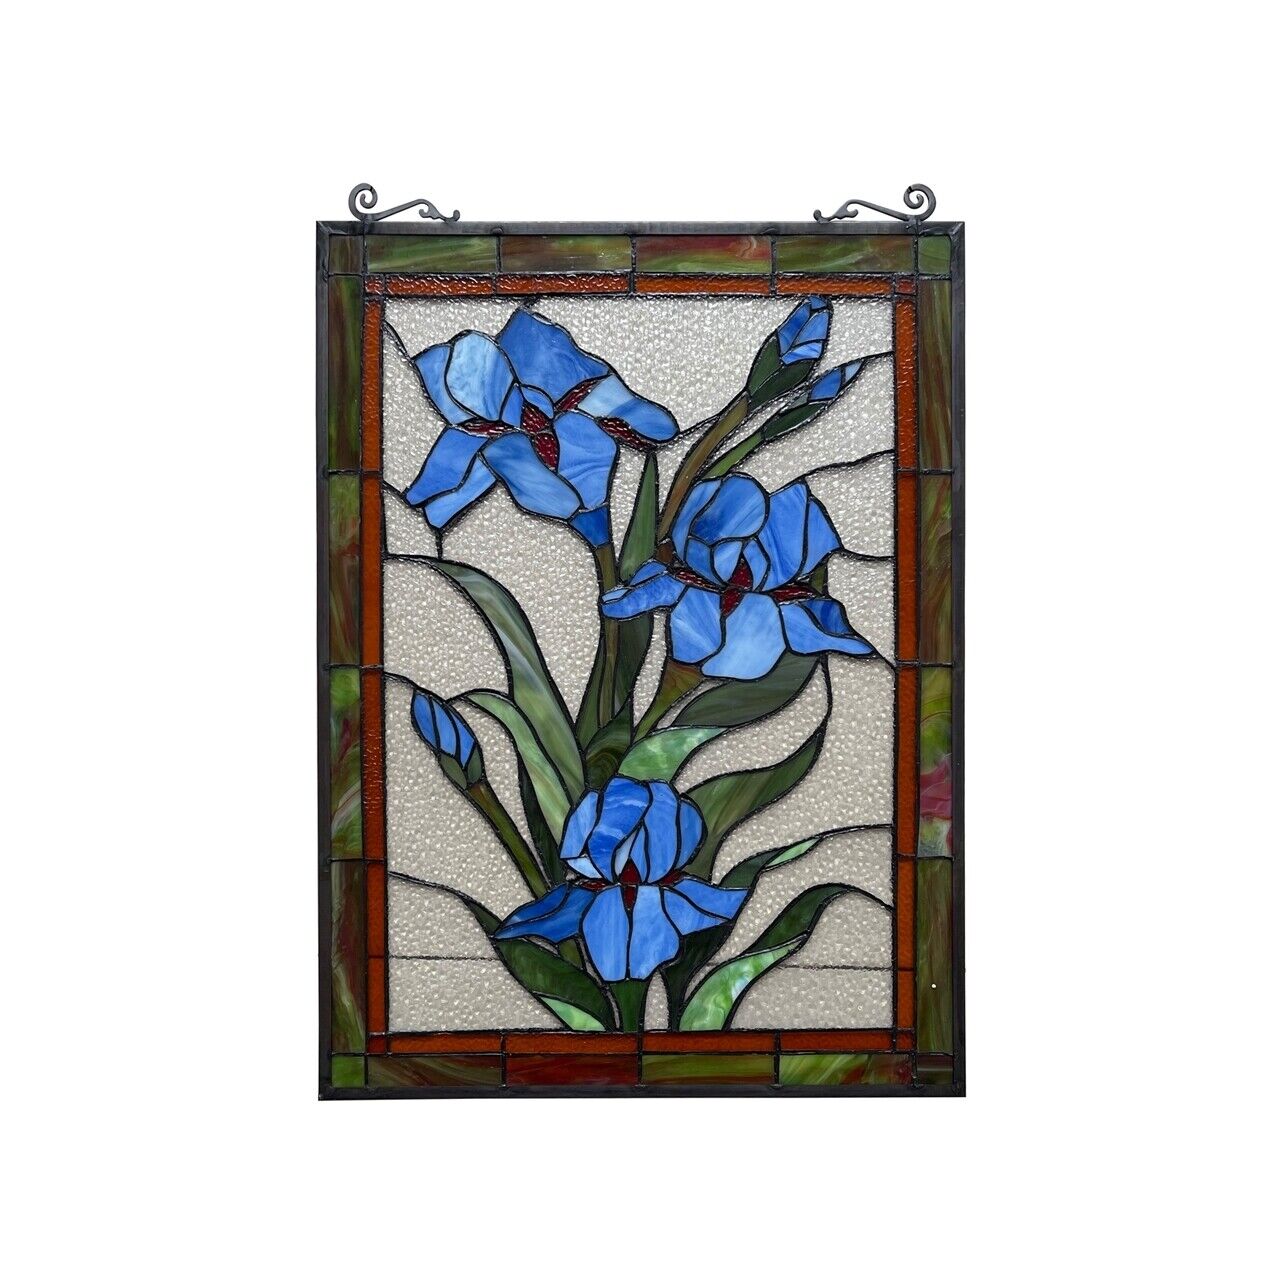 Antique Vintage Style 25" Floral Stained Glass Window Hanging Panel Suncatcher